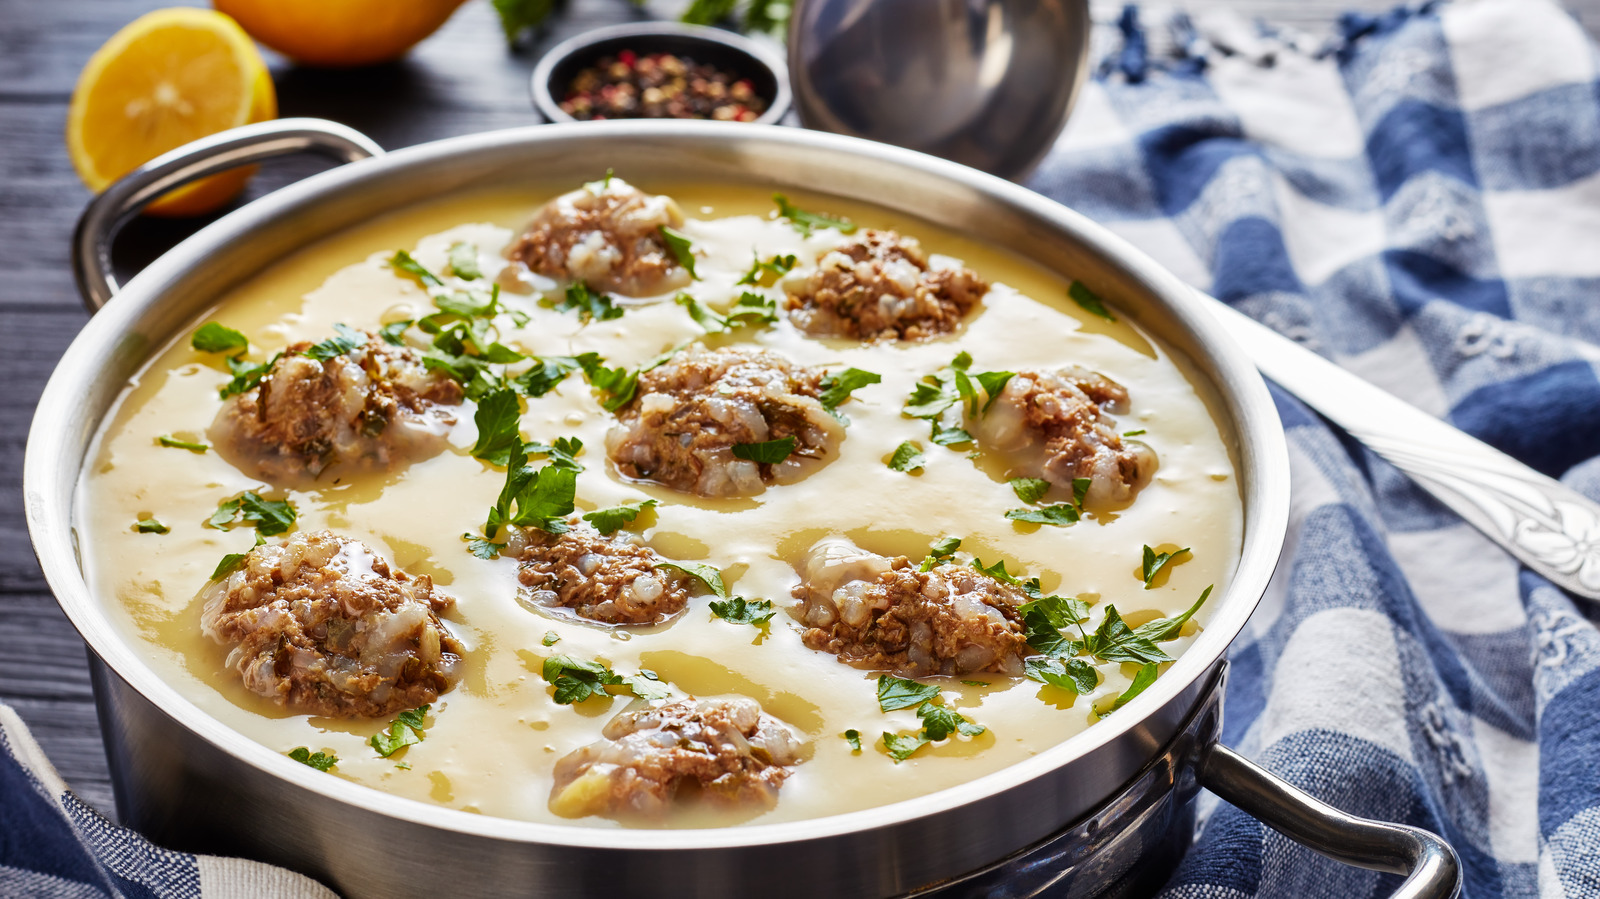 The Arabic Meatball Soup That's Made For Holiday Celebrations